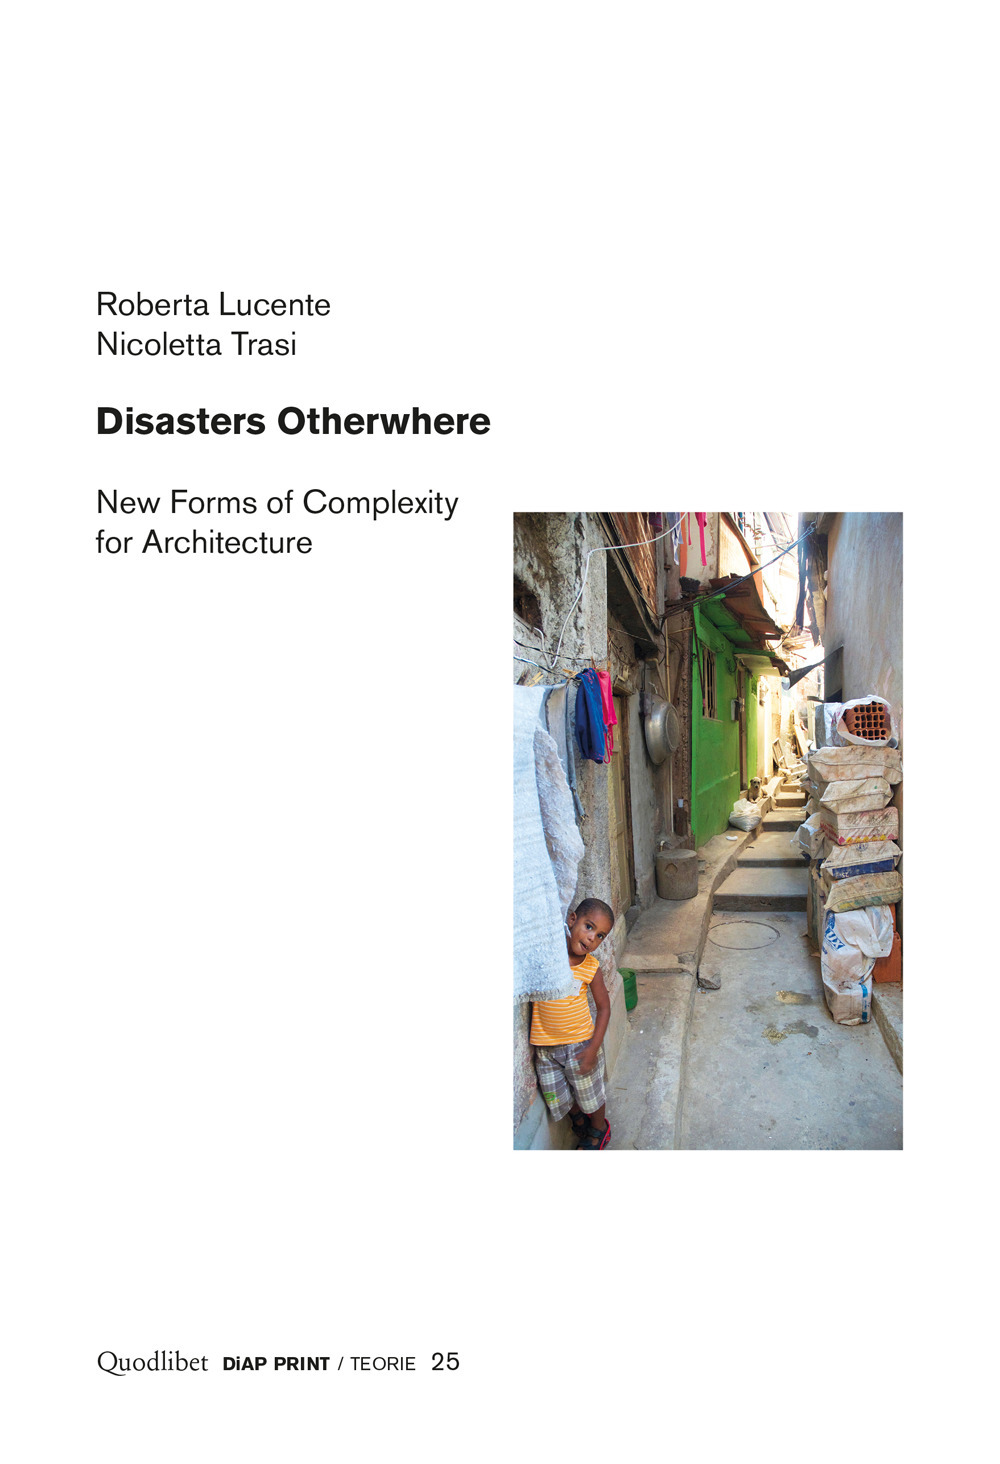 DISASTERS OTHERWHERE. NEW FORMS OF COMPLEXITY TO ARCHITECTURE - 9788822905130